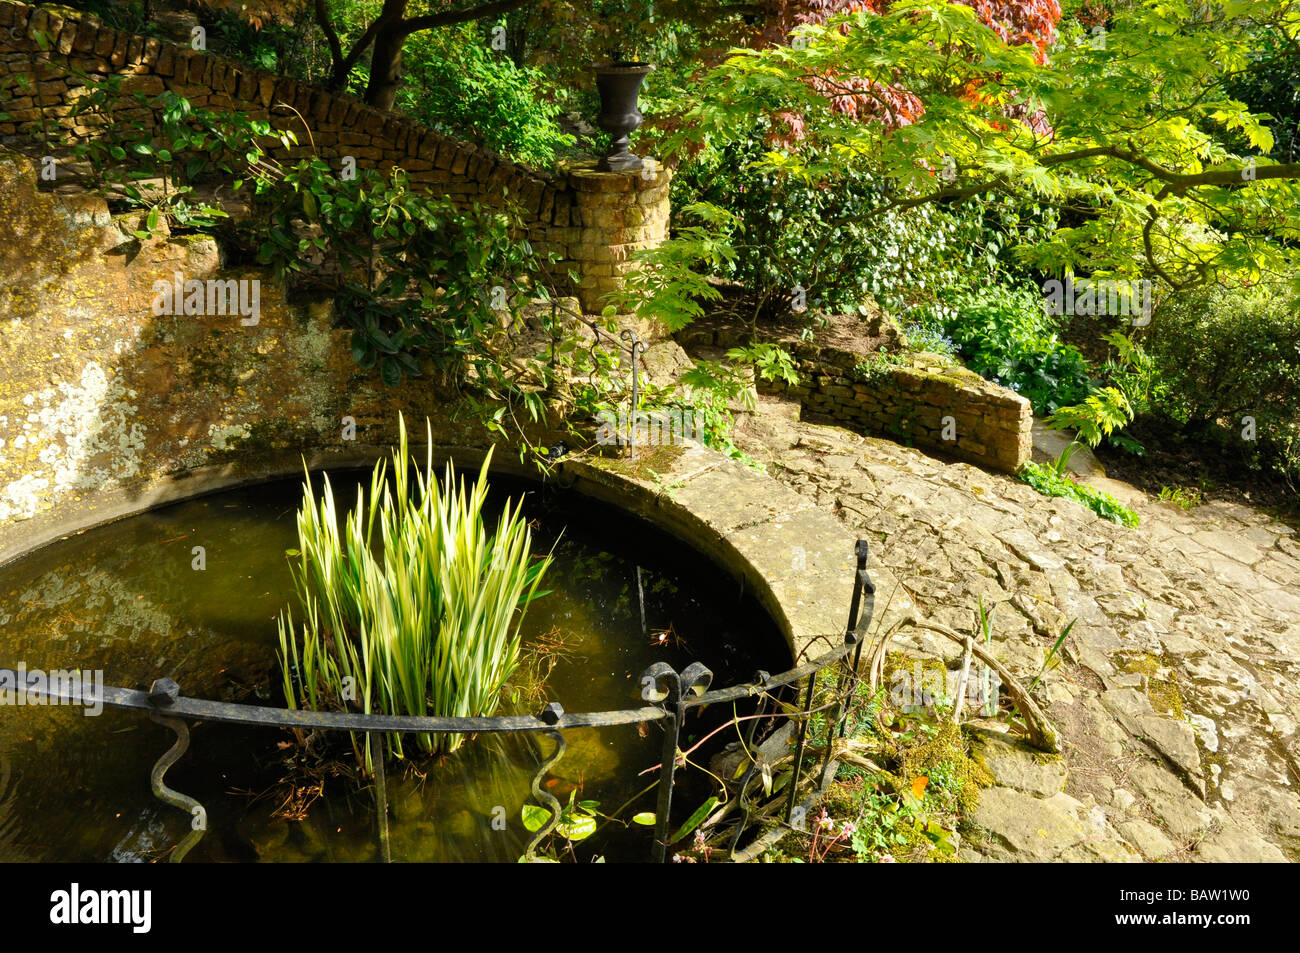 Kiftsgate Court Garden, Gloucestershire, England - The Round Pool and steps in the 'Middle Bank'. Stock Photo